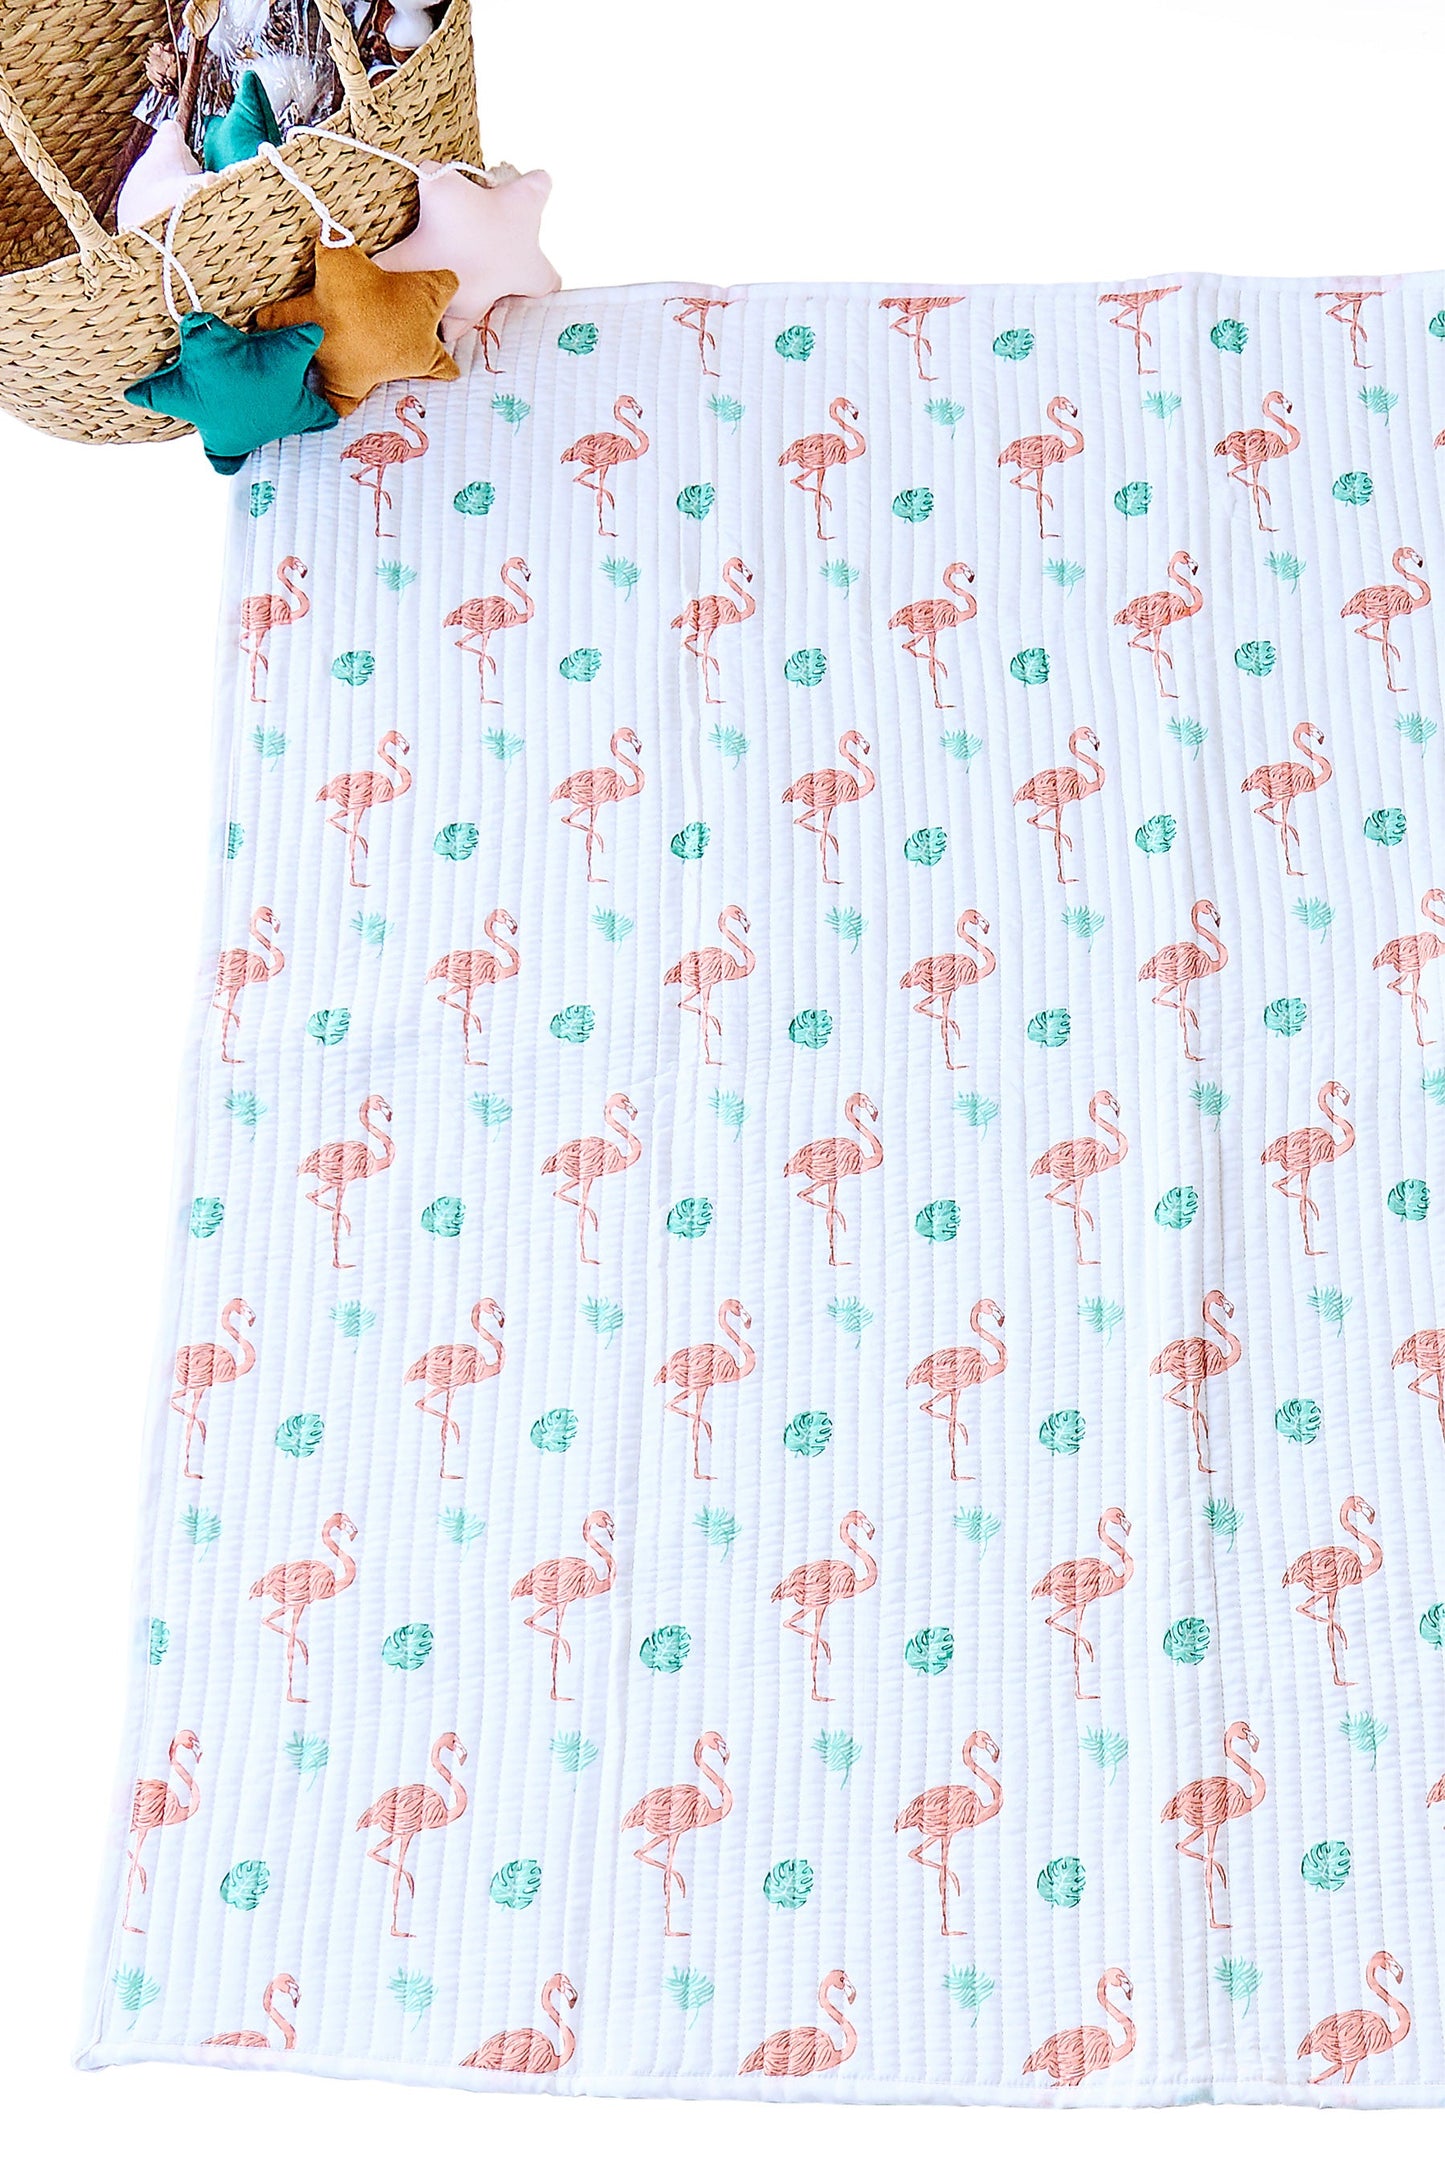 Reversible Muslin Baby Play Mat in Flaming And The Leaves Print